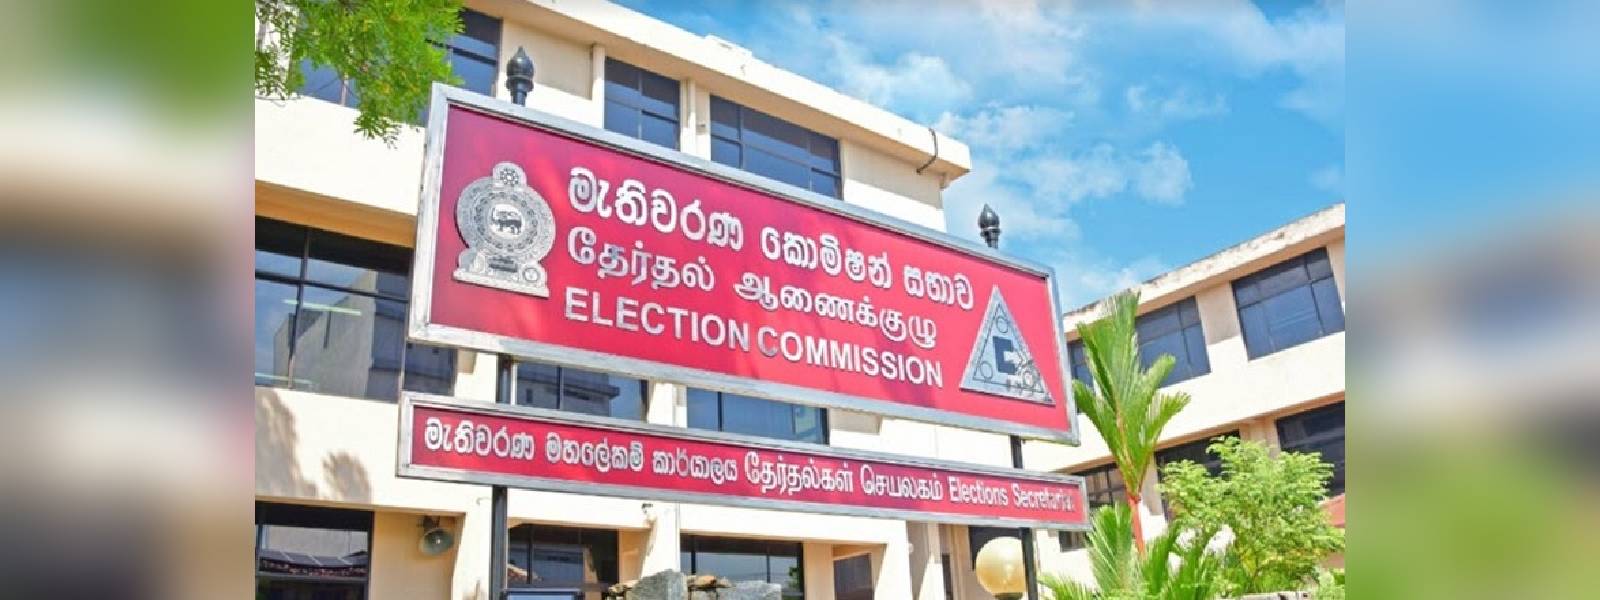 Non-Parliament parties summoned to Elections Comm.